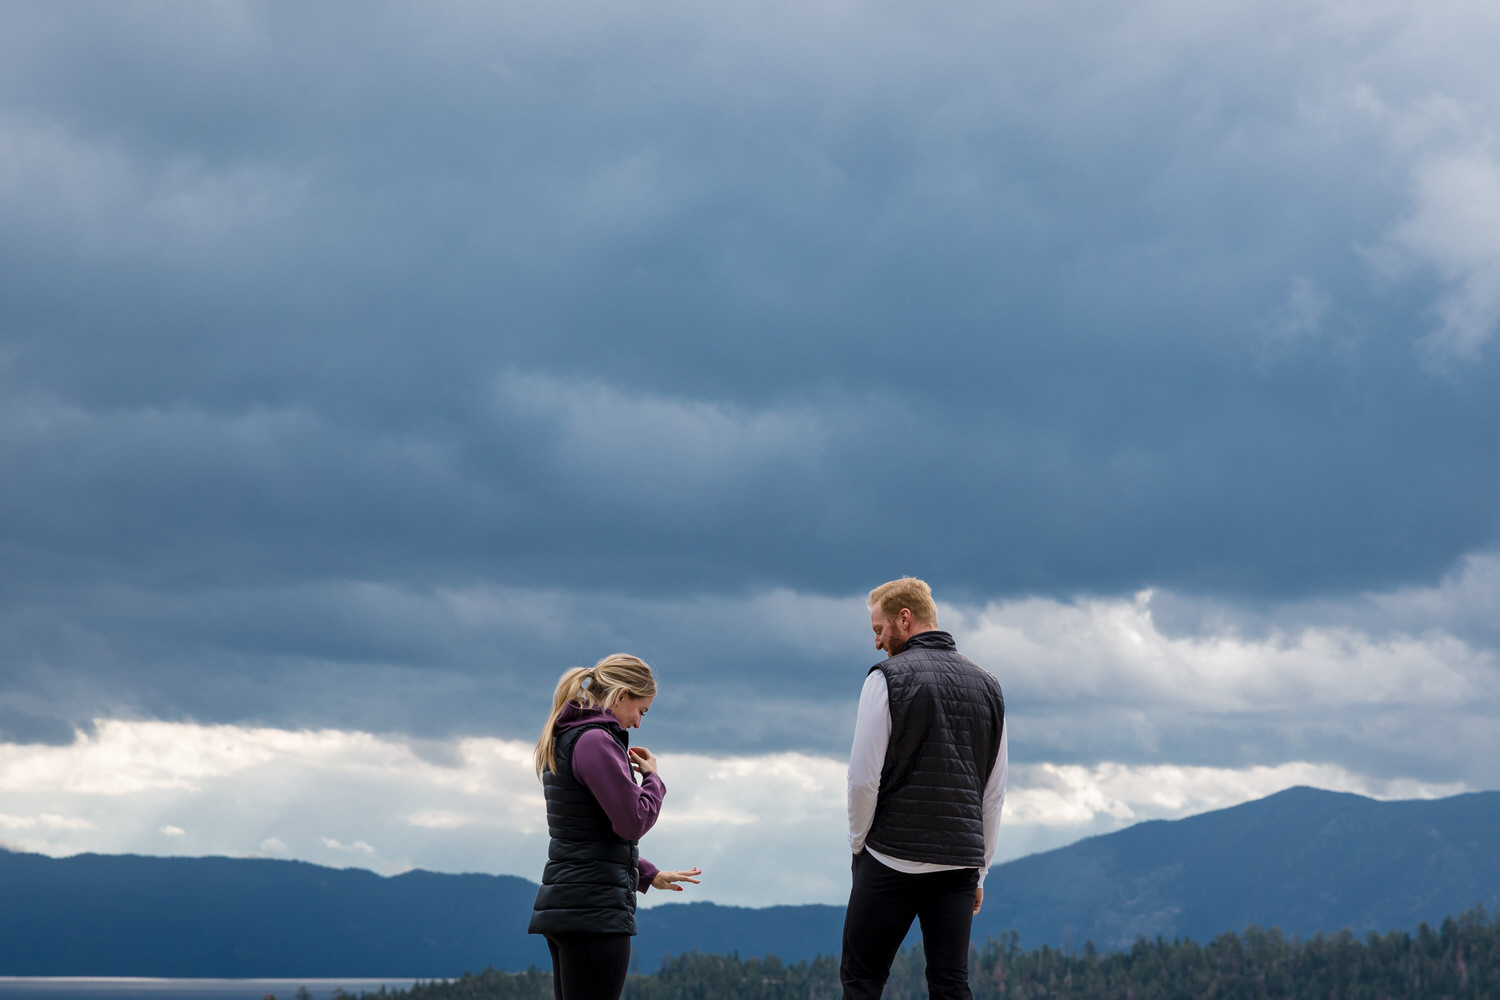 A candid moment admiring the engagement ring at a surprise proposal in front of Lake Tahoe on a cloudy day.